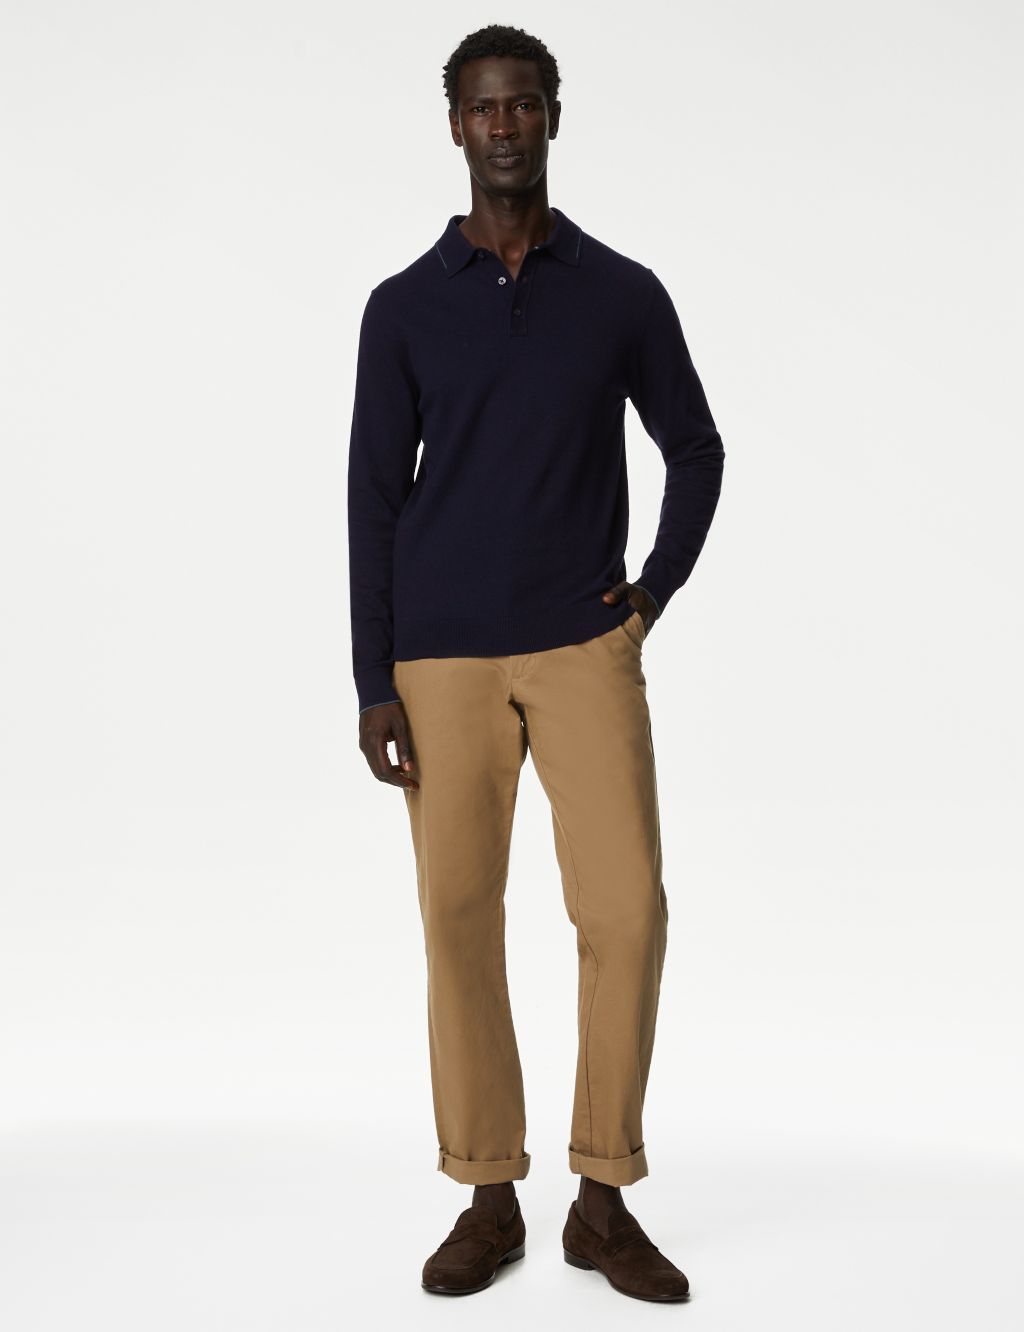 Men’s Long-Sleeved Knitted Polo Shirts | M&S